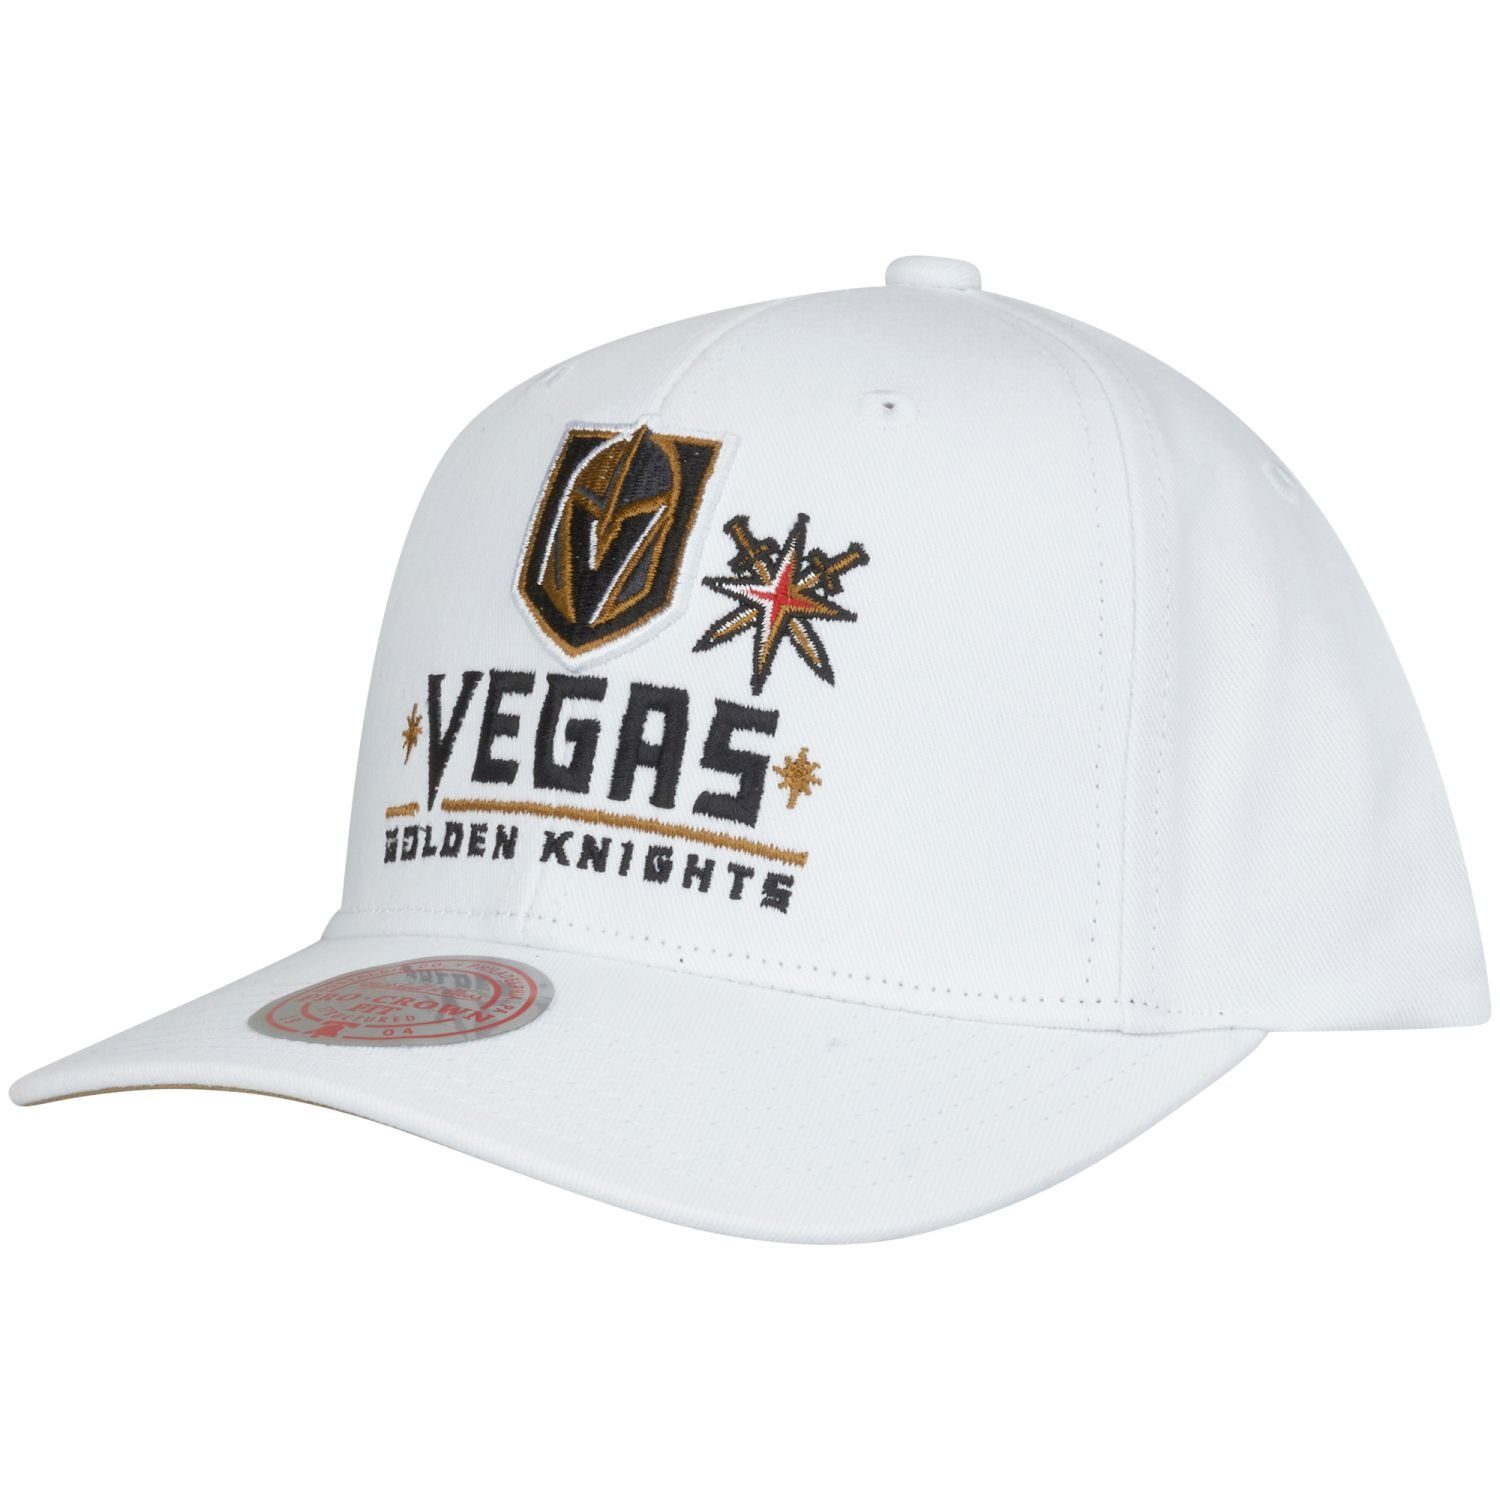 Cap ALL IN Snapback Mitchell & Knights Golden PRO Vegas Ness